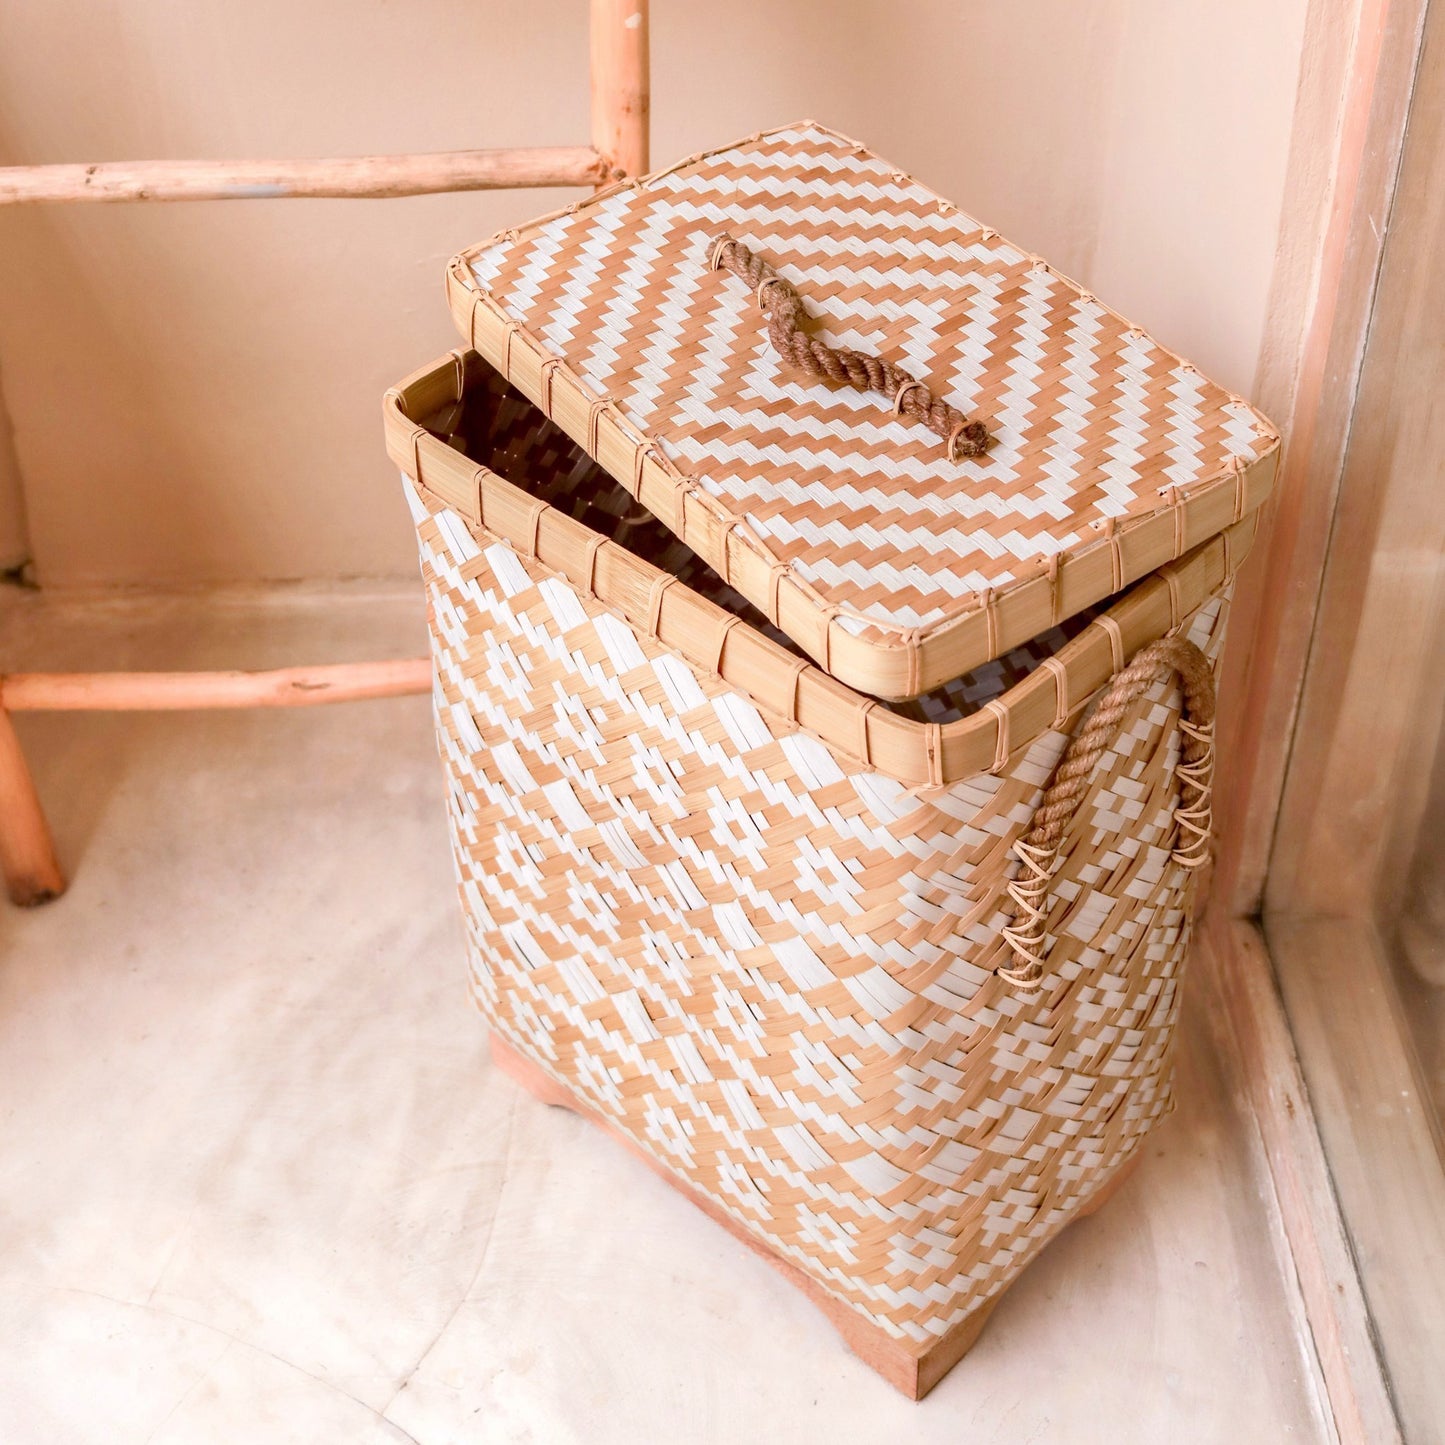 Laundry Basket with Lid DARI Handwoven from Bamboo with a Beige White Zig Zag Pattern